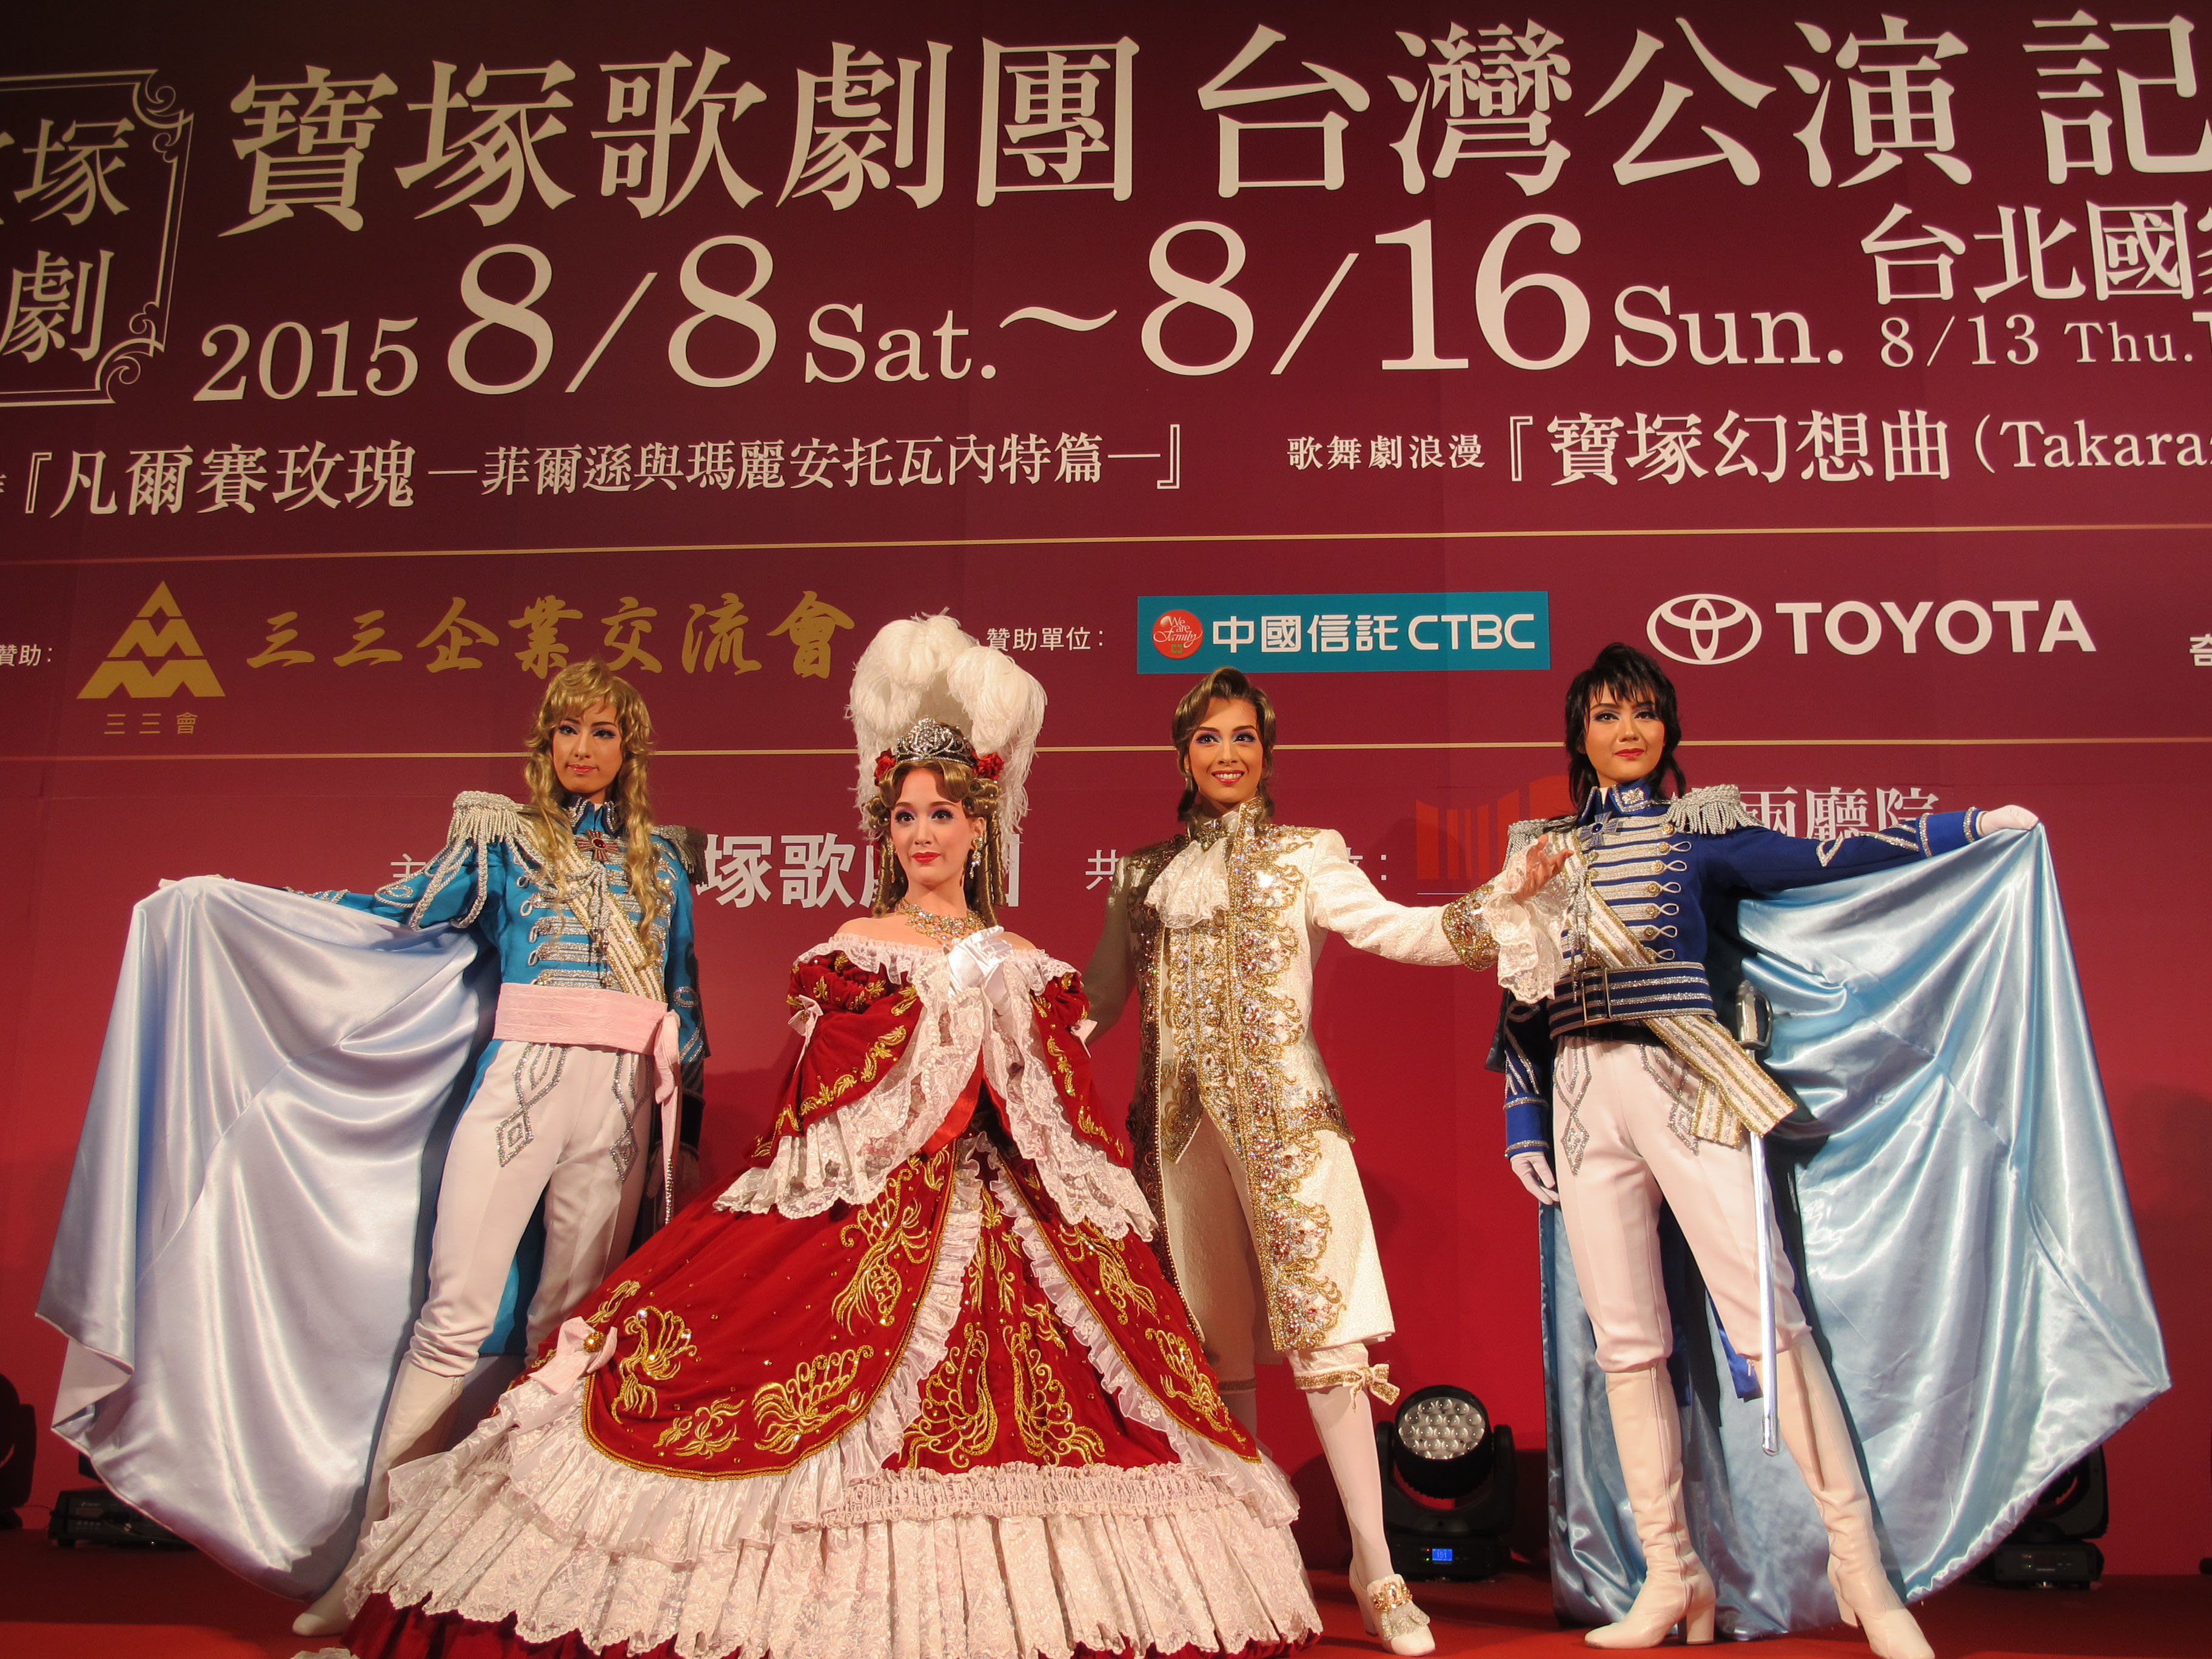 Takarazuka Revue to make second Taiwan tour in August | The Japan Times